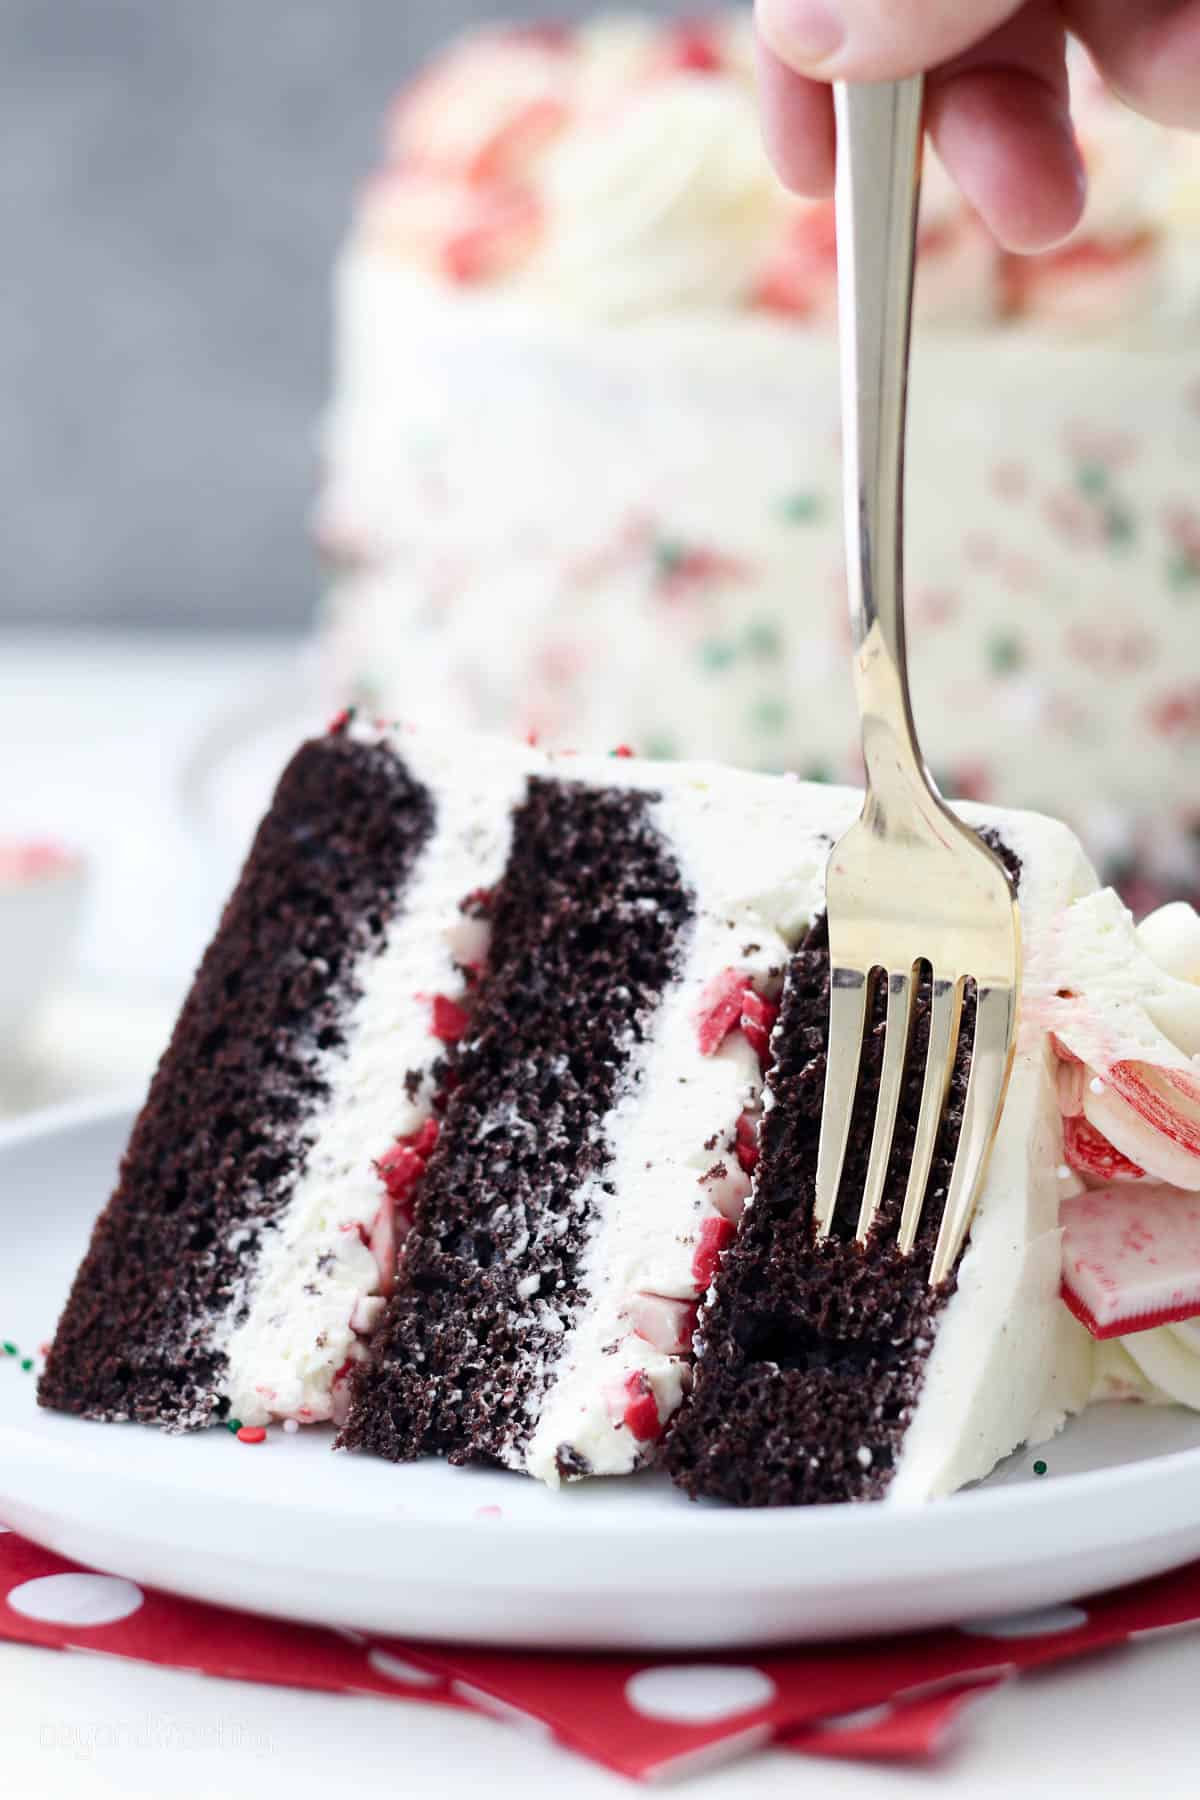 a fork being plunged into a slice of cake on a plate